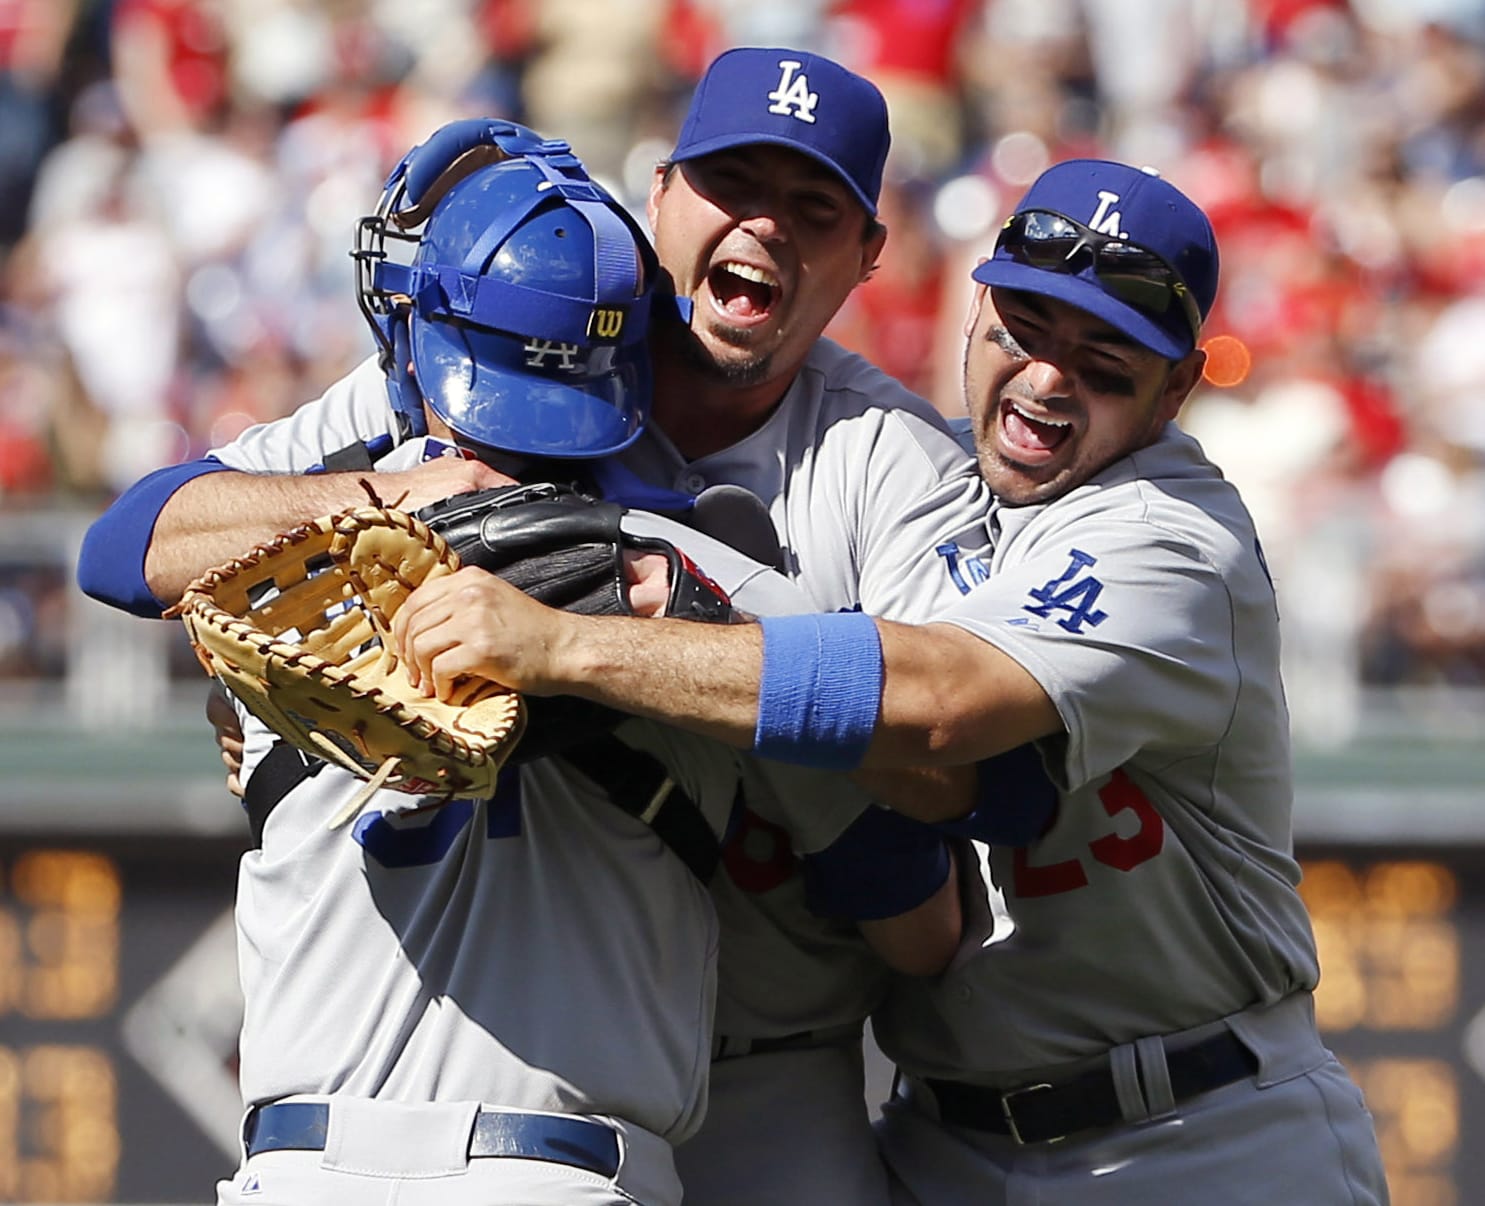 Los Angeles Dodgers starting pitcher Josh Beckett, center, celebrates with catcher Drew Butera, left, and first baseman Adrian Gonzalez after pitching a no-hitter against the Philadelphia Phillies, Sunday, May 25, 2014, in Philadelphia. Los Angeles won 6-0. Beckett pitched the first no-hitter of his career and the first in the majors this season.